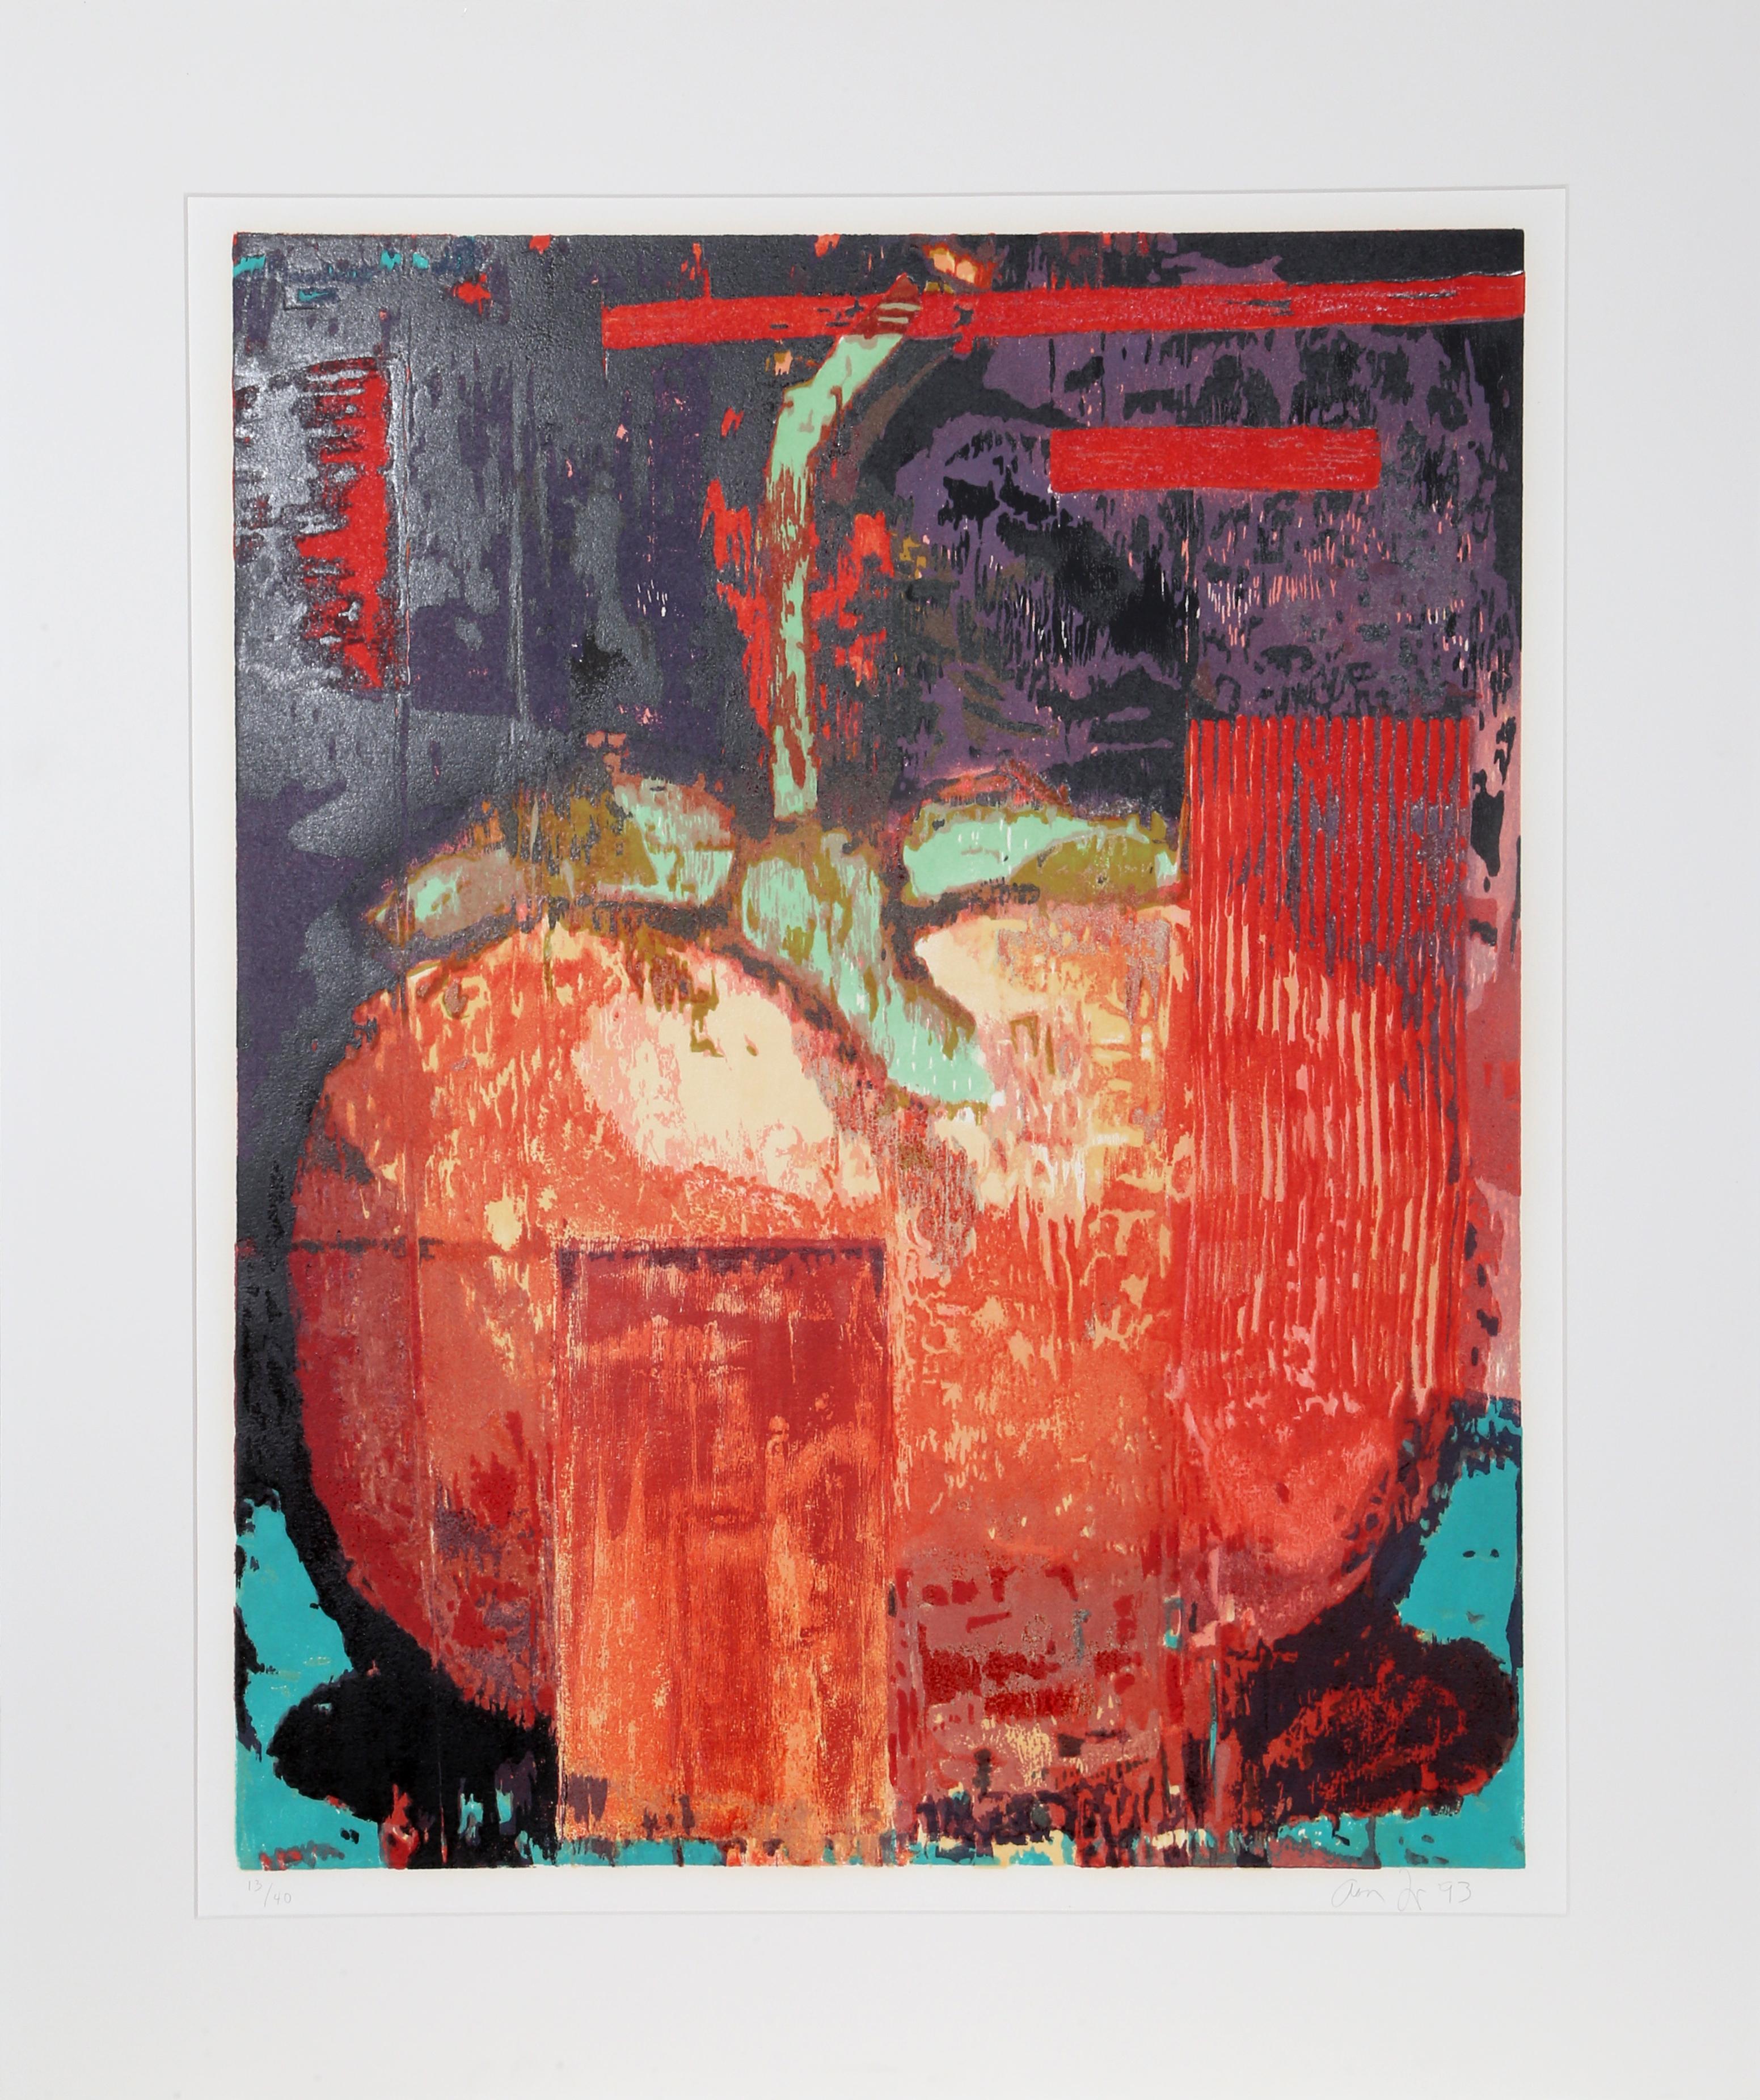 Artist: Aaron Fink, American
Title: Cherry Tomato
Year: 1993
Medium: Woodcut, signed and numbered in pencil 
Edition: 13/40
Image Size: 28  x 22 inches
Sheet Size: 34 x 28 inches
Mat: 37 x 30 inches